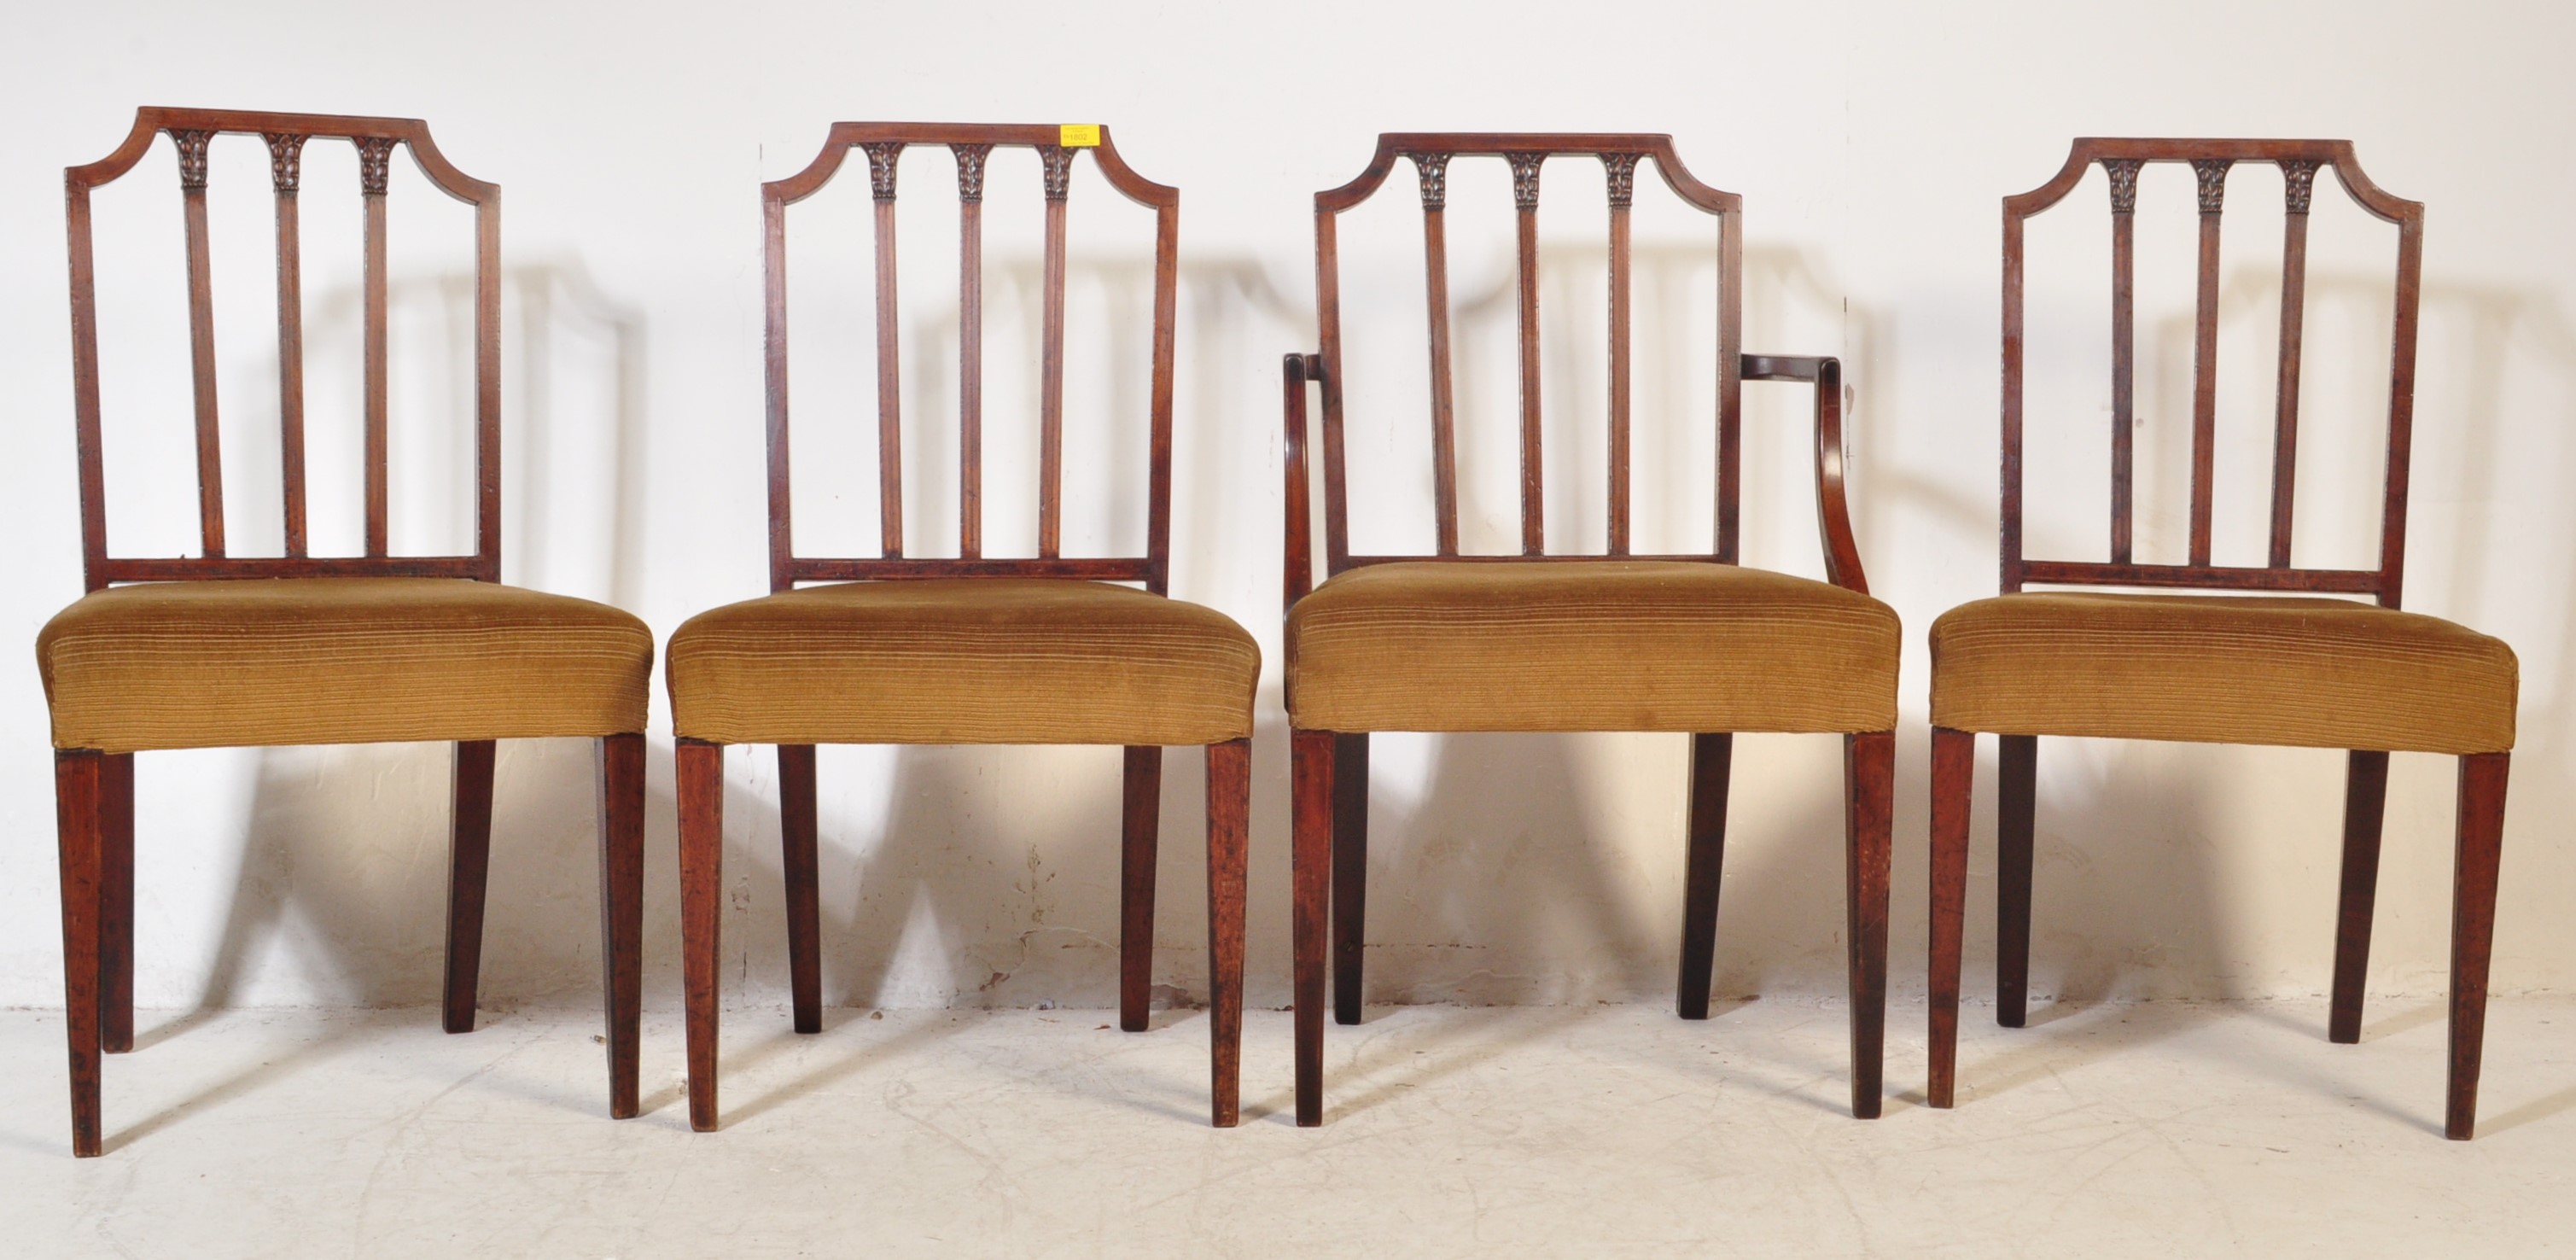 FOUR EDWARDIAN INLAID MAHOGANY DINING CHAIRS